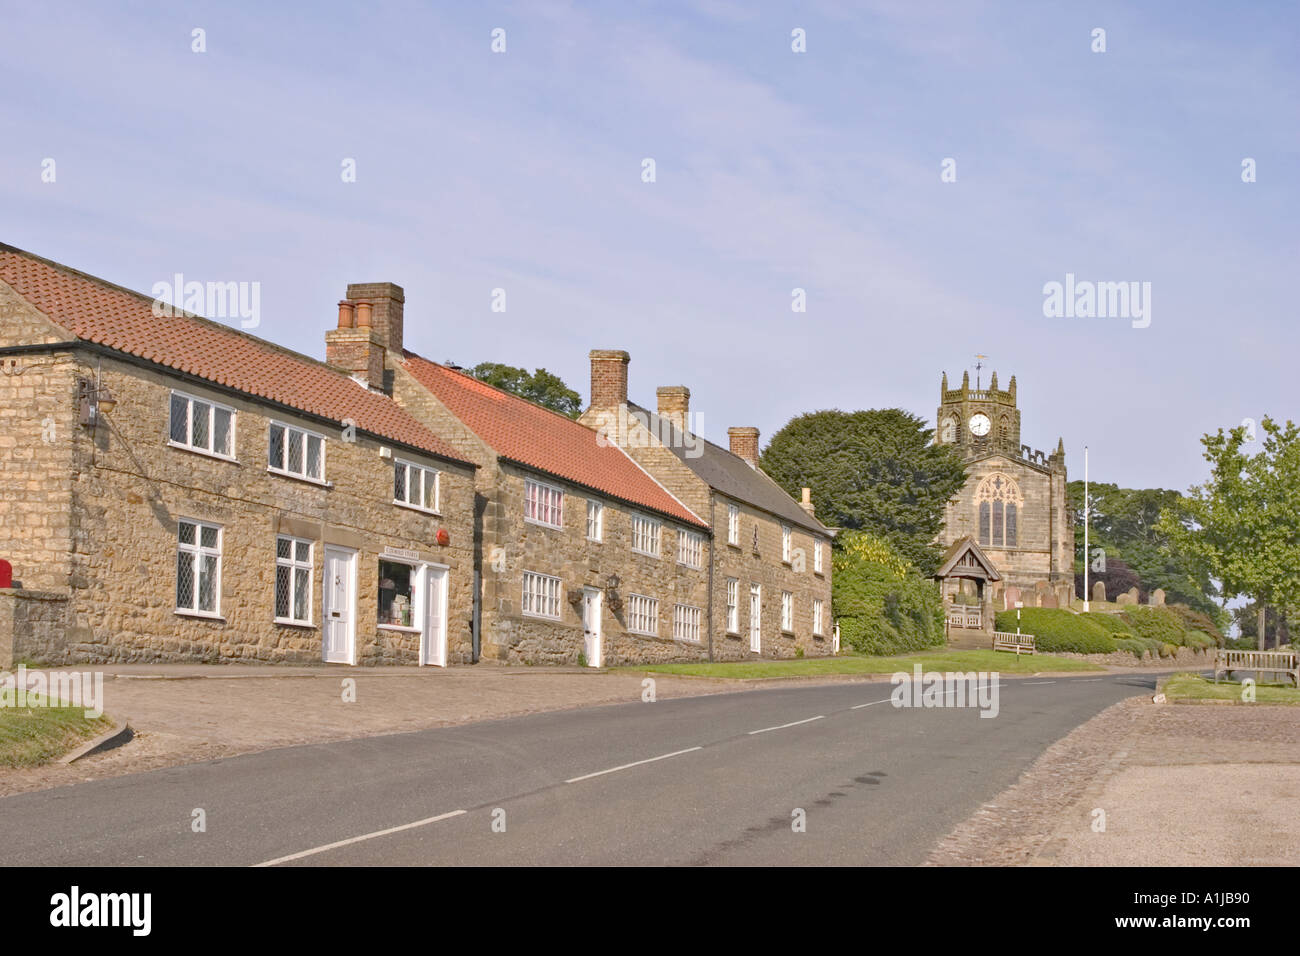 Coxwold North Yorkshire UK Cottages and church Stock Photo